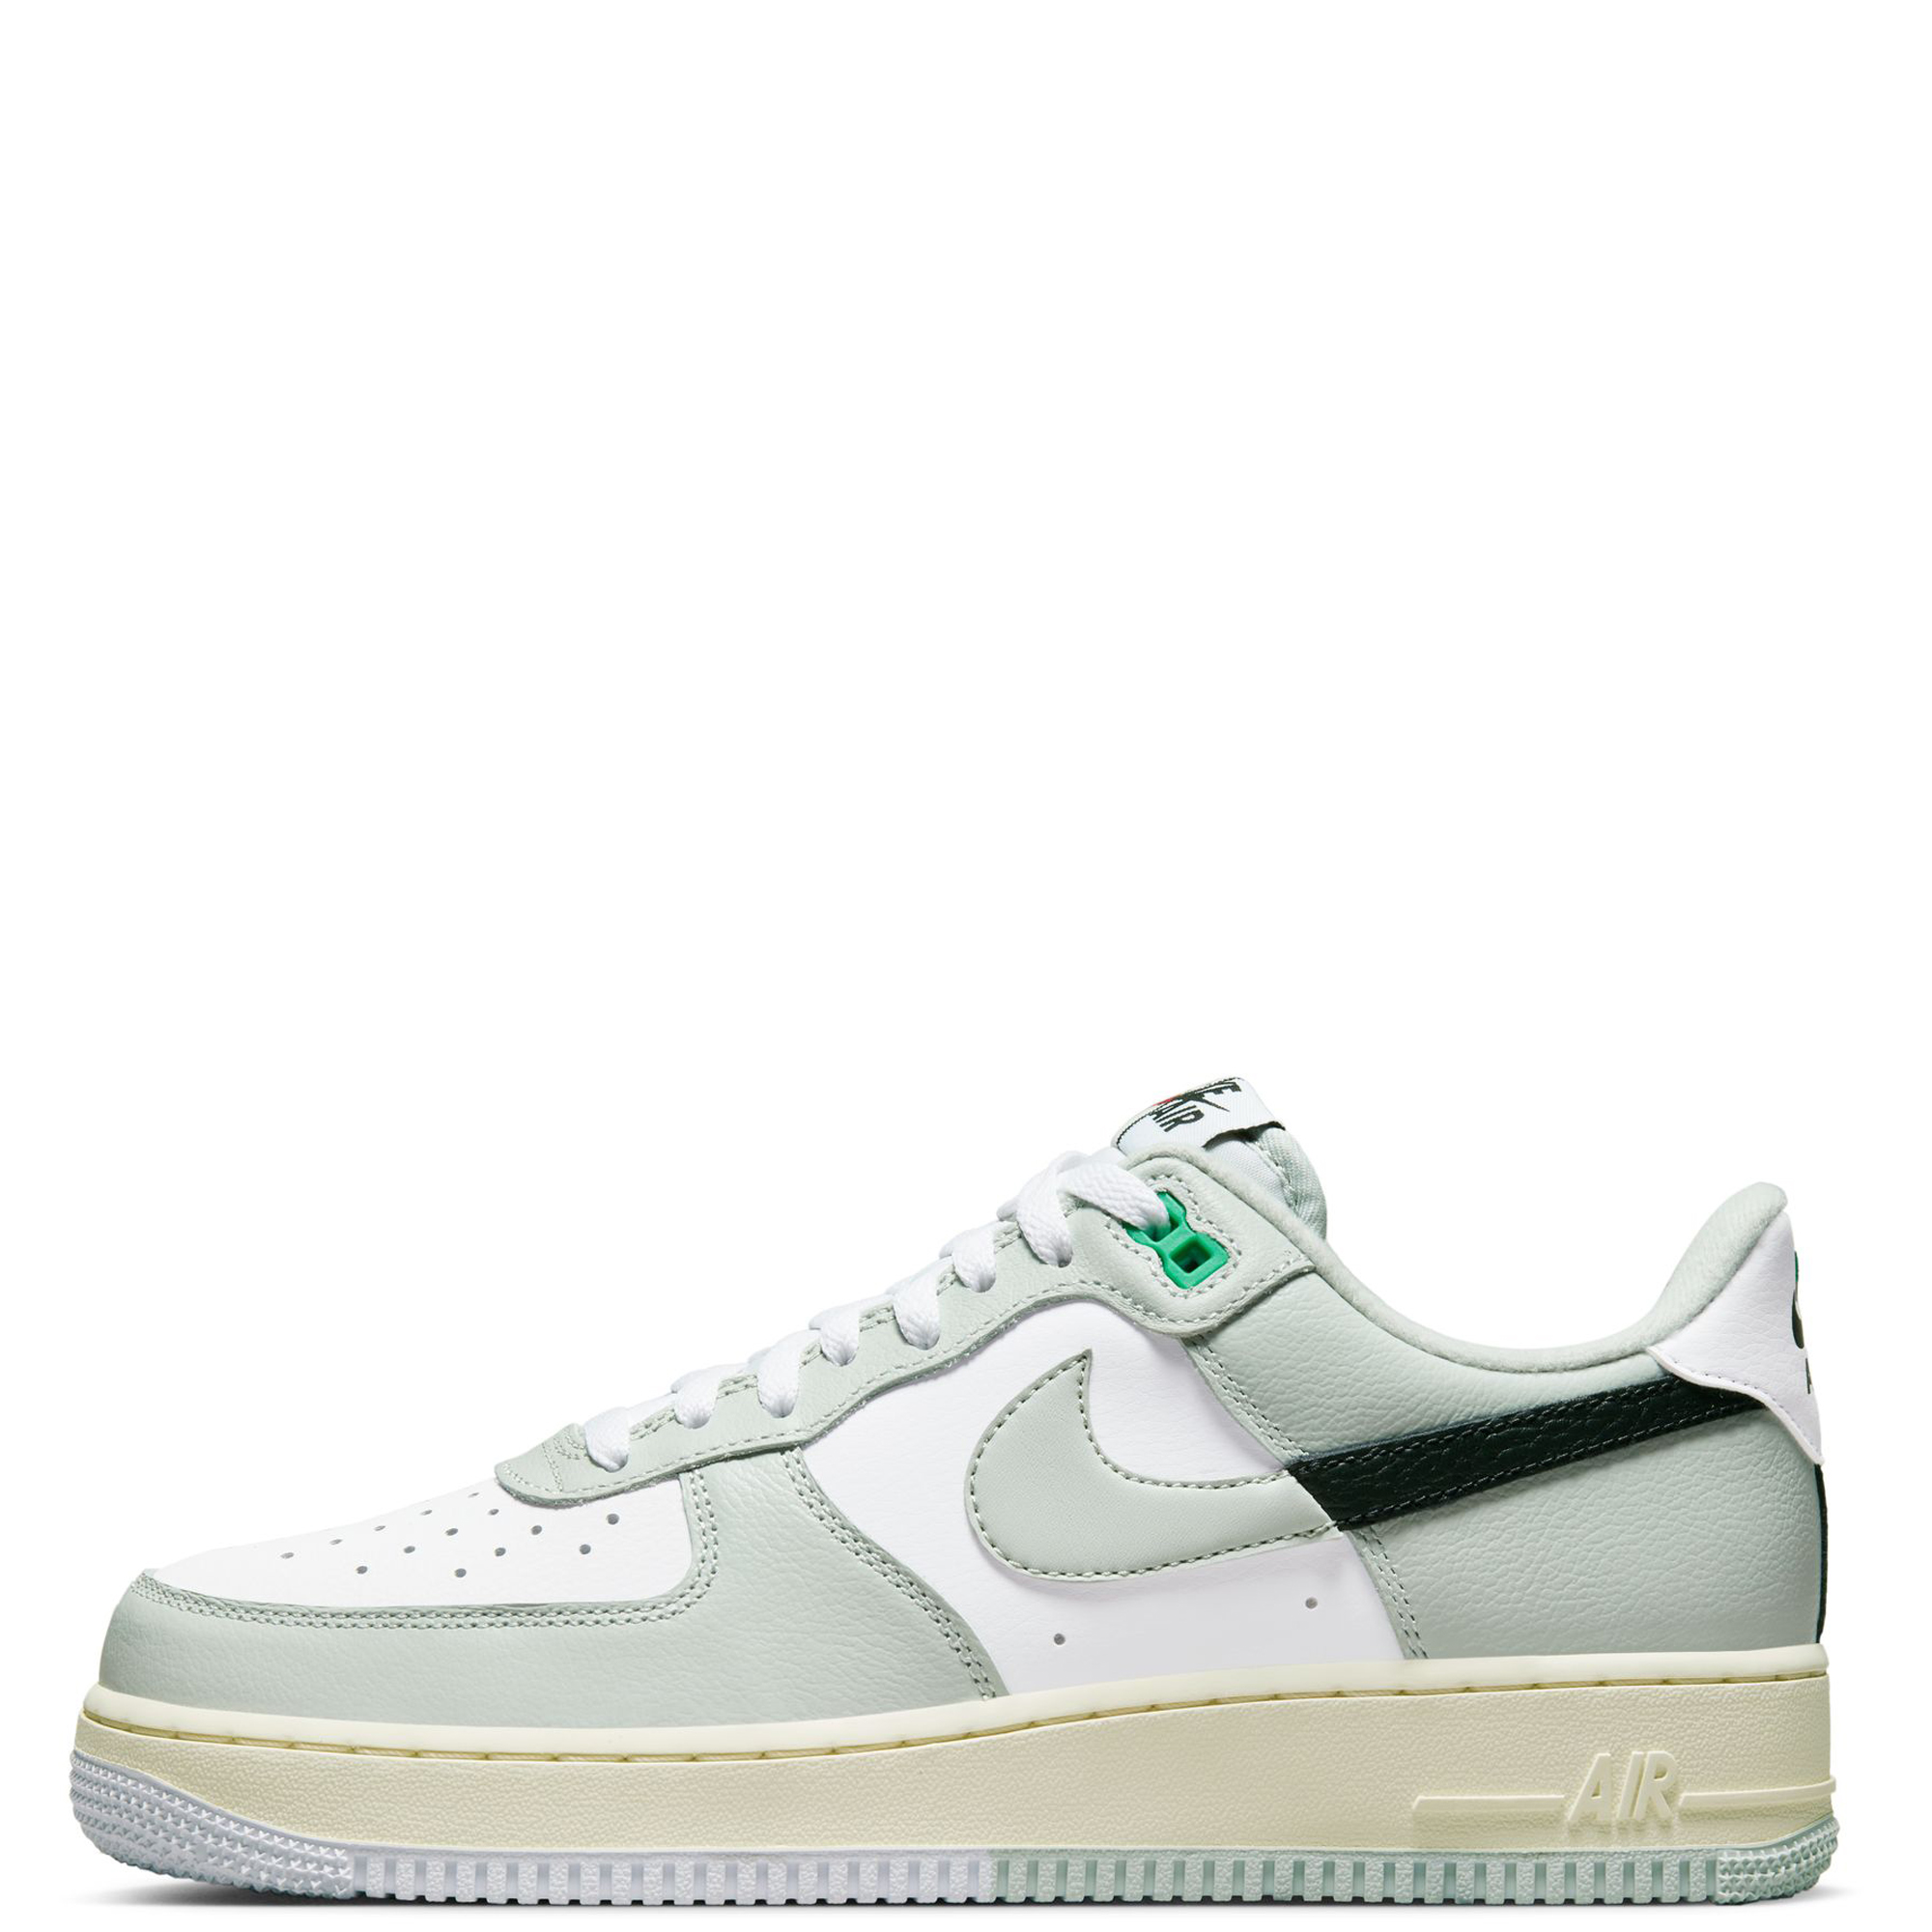 Nike Air Force 1 LV8 2 GS AF1 Padded Tongue Kids Youth Casual